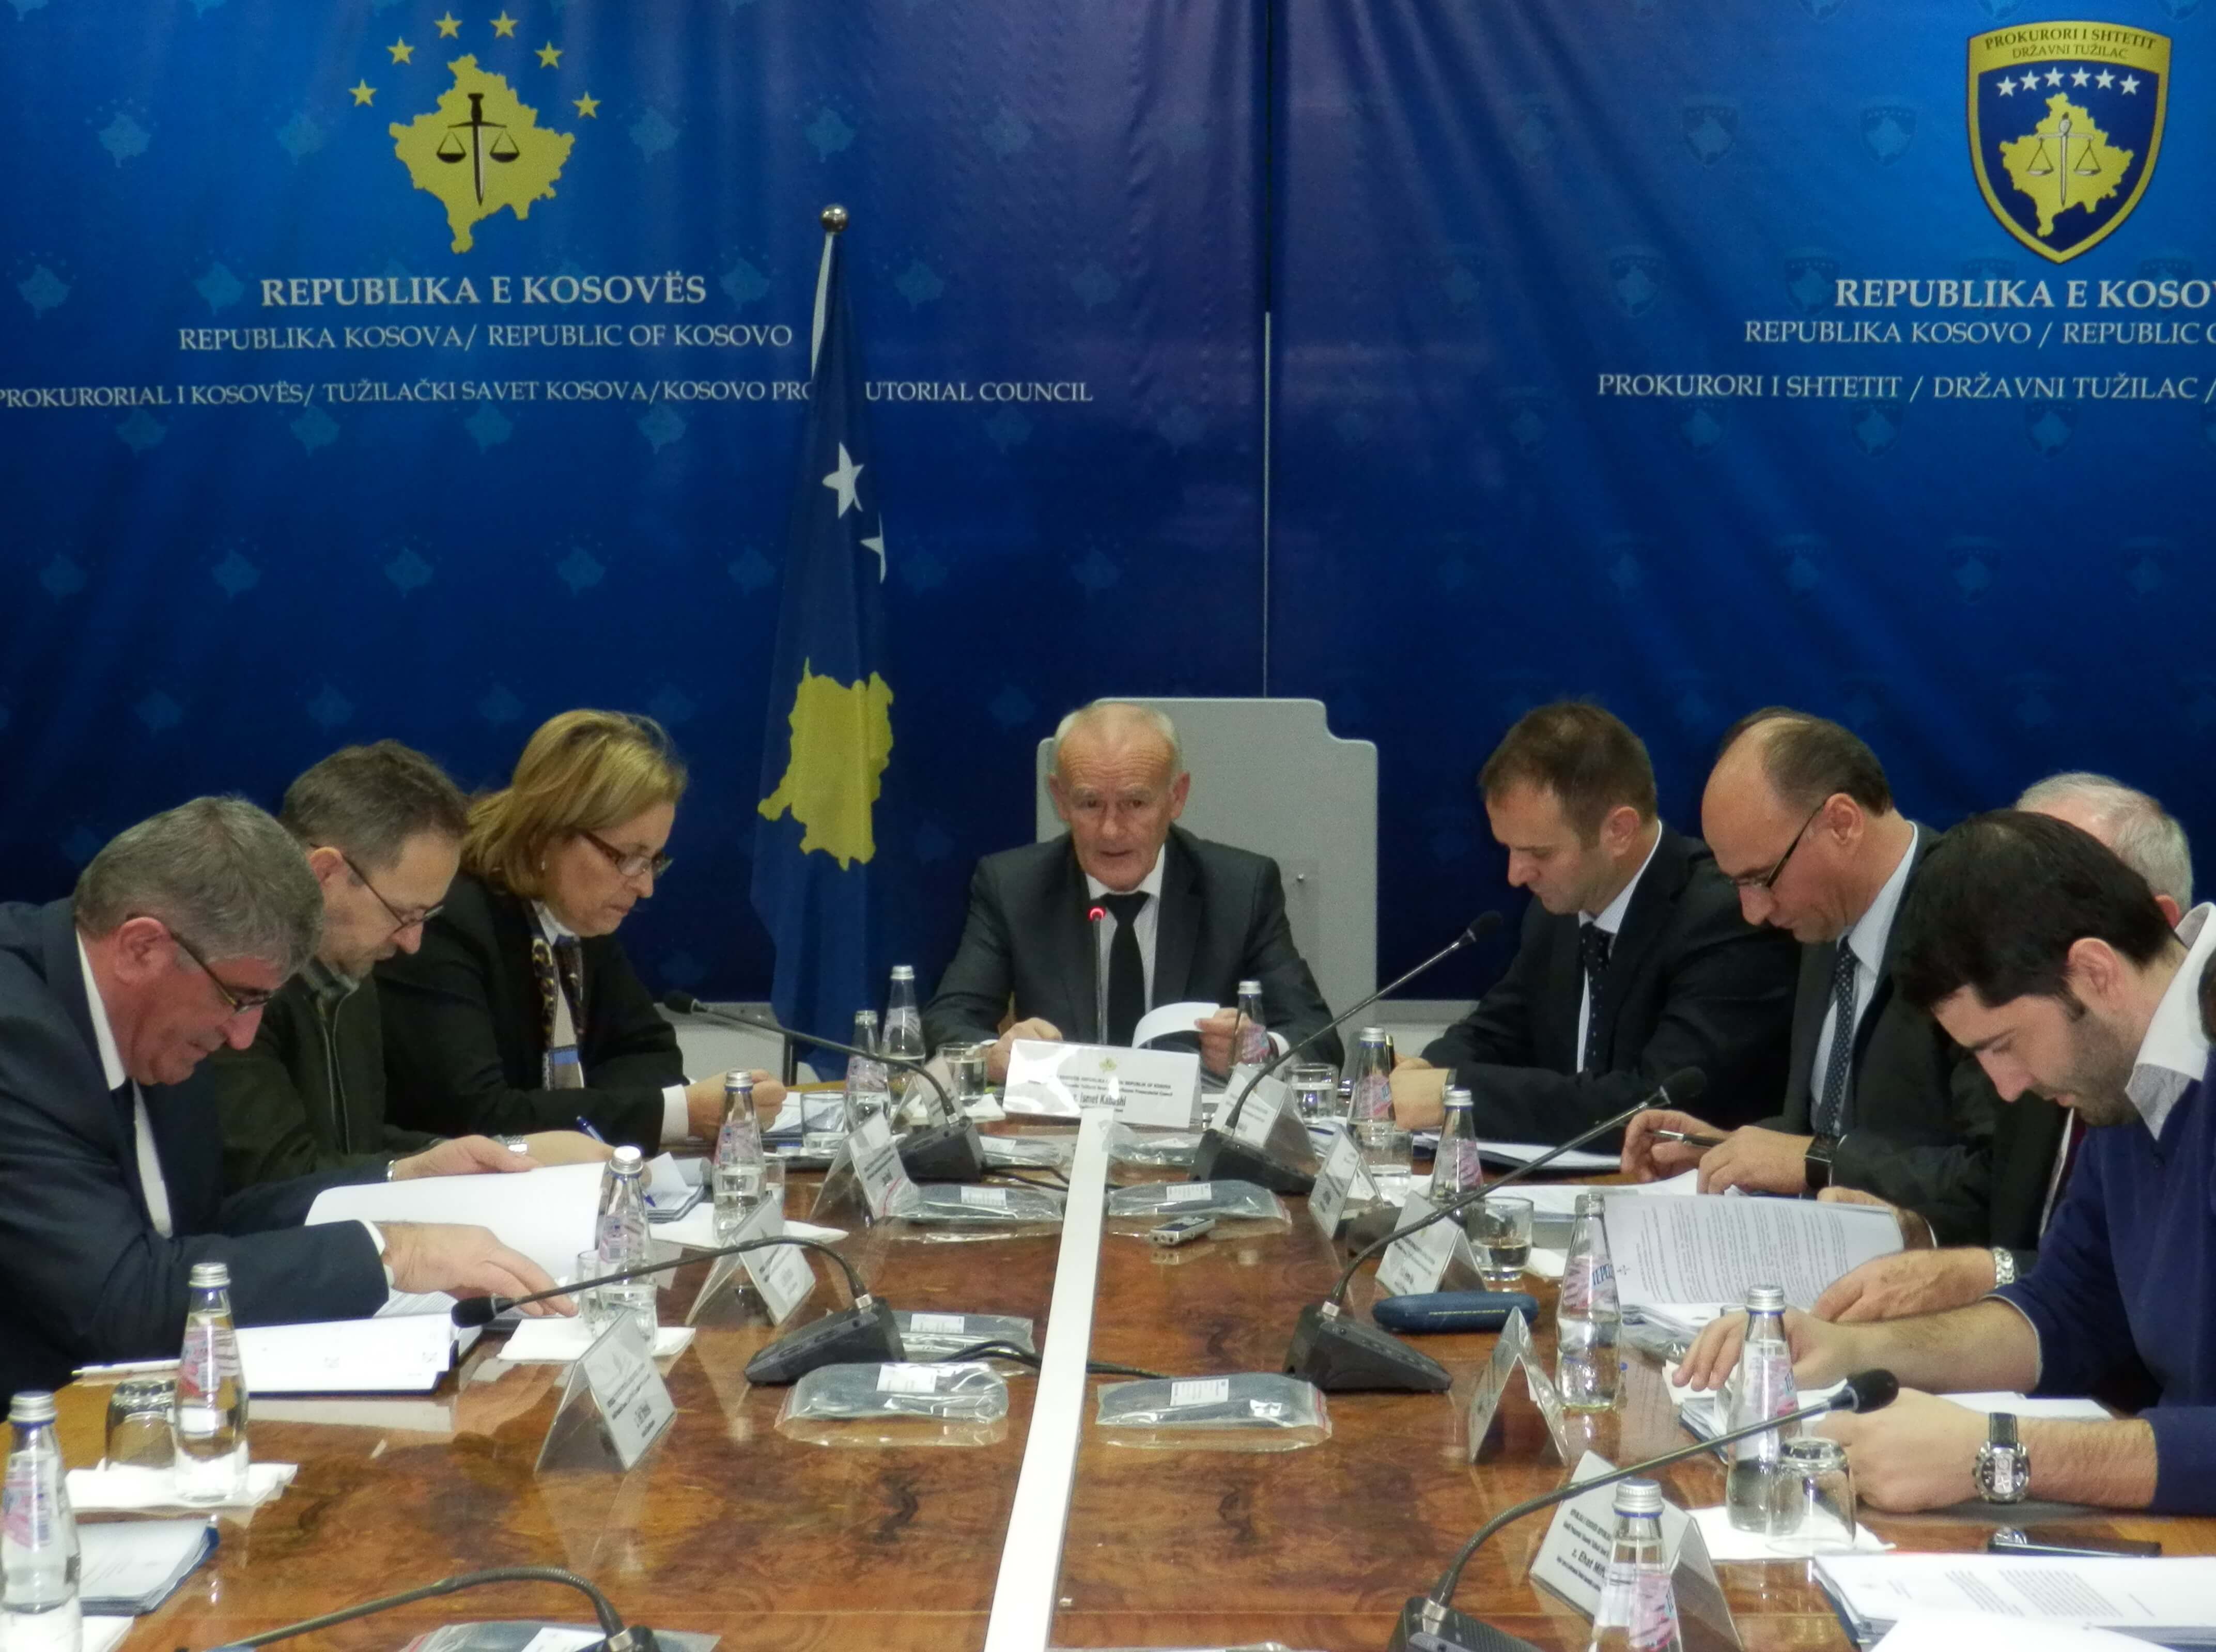 THERE WAS HELD THE NEXT MEETING OF KOSOVO PROSECUTORIAL COUNCIL MEMBERS